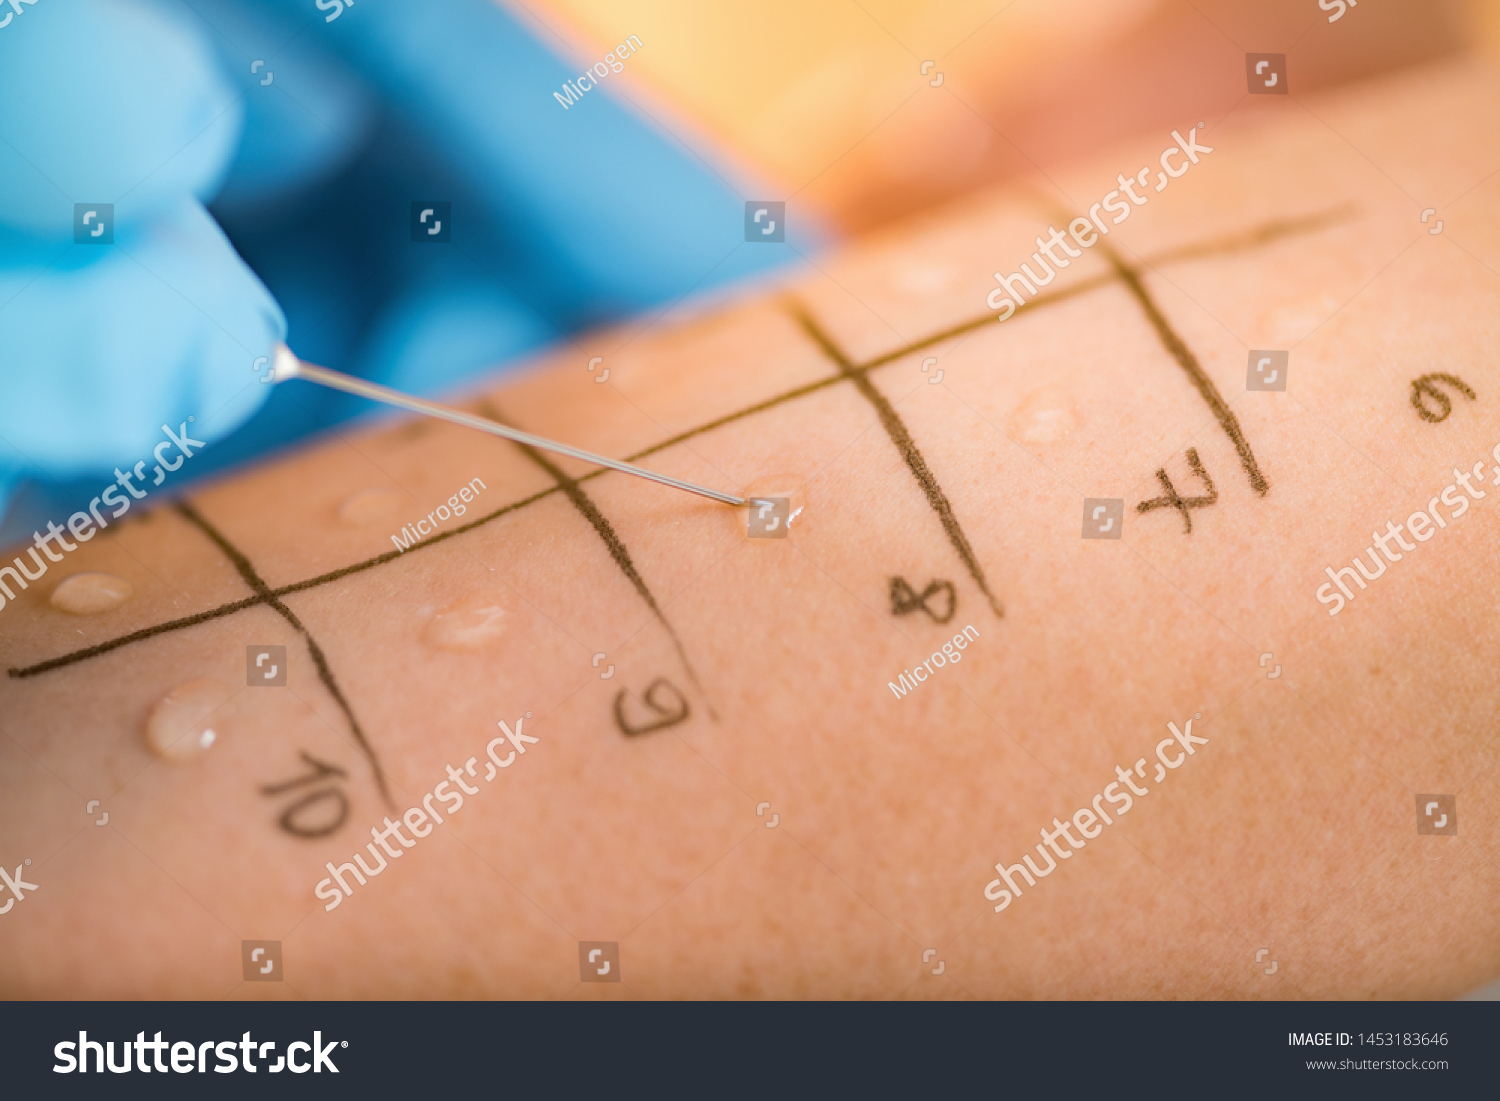 Immunologist Doing Skin Prick Allergy Test on a Woman’s Arm #1453183646